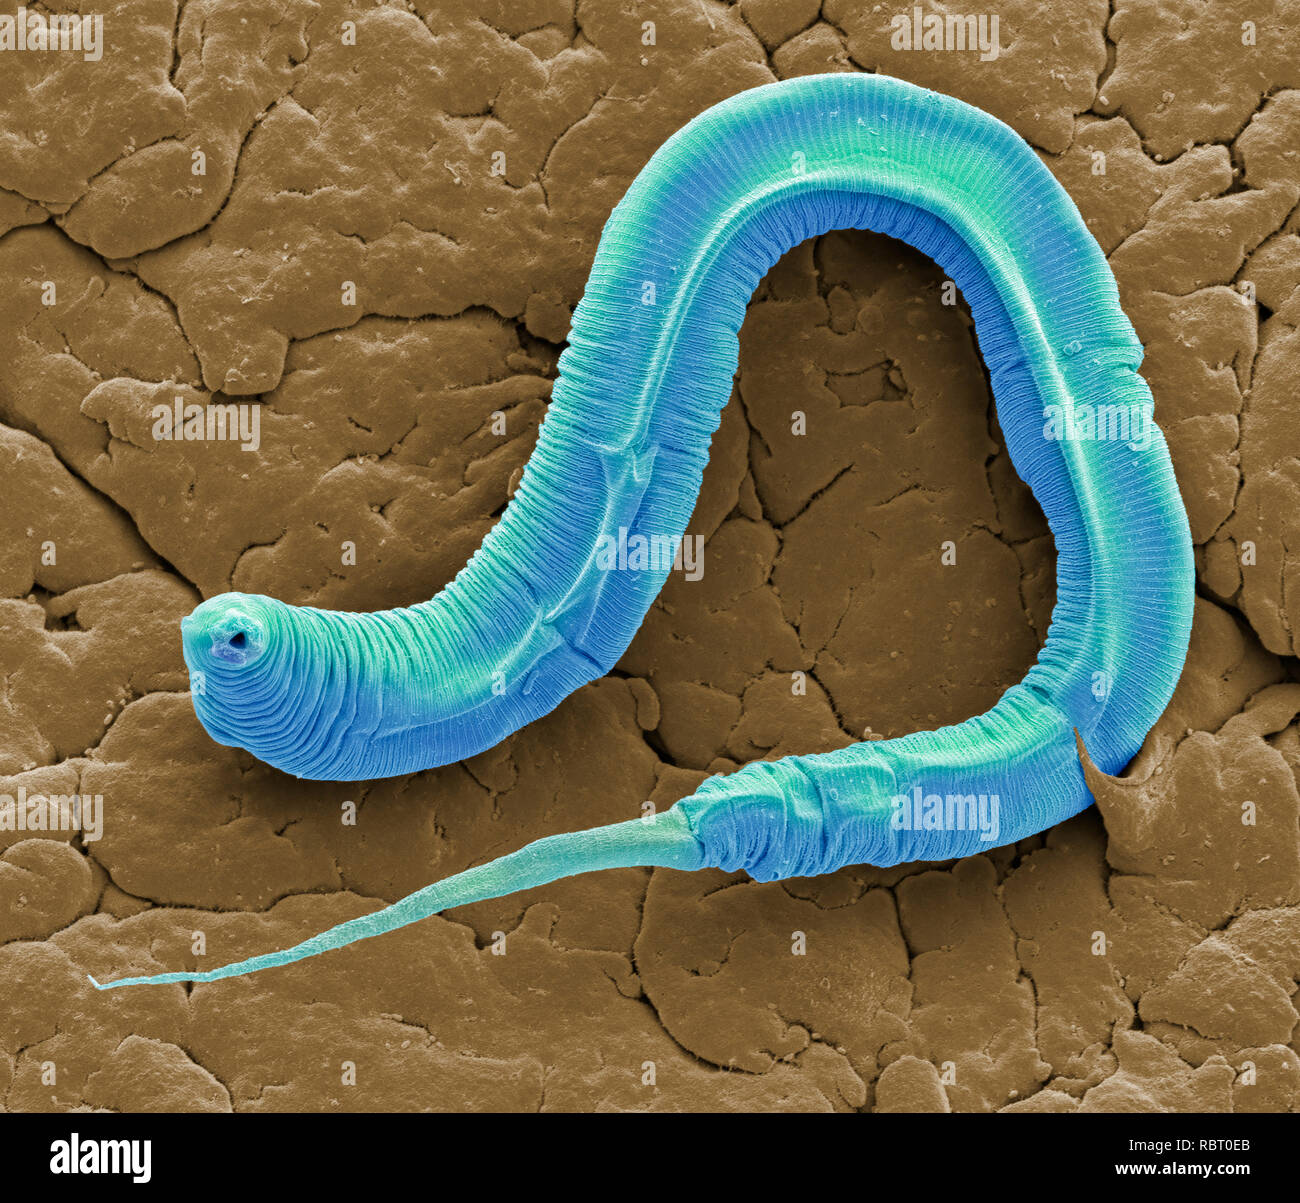 Caenorhabditis elegans worm, coloured scanning electron micrograph (SEM).  C. elegans is a soil-dwelling hermaphrodite nematode worm and one of the  most studied animals in biological and genetic research. A tendency to  reproduce